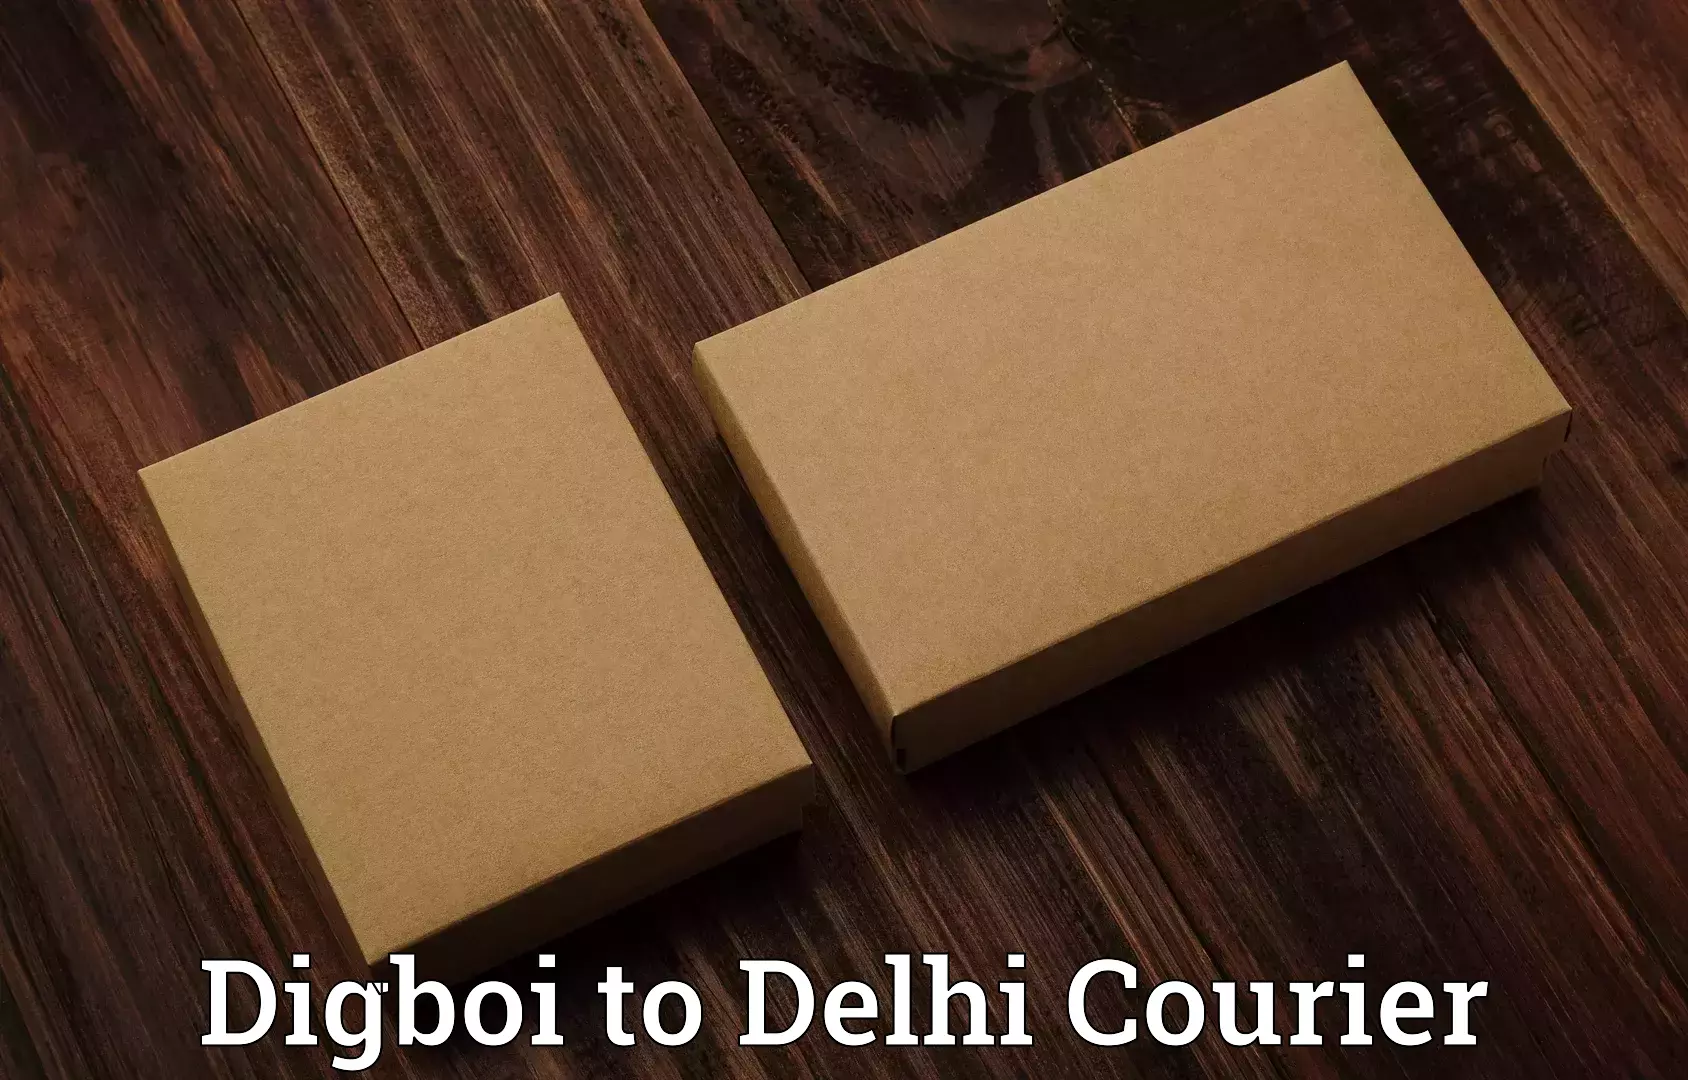 Personal effects shipping in Digboi to Lodhi Road